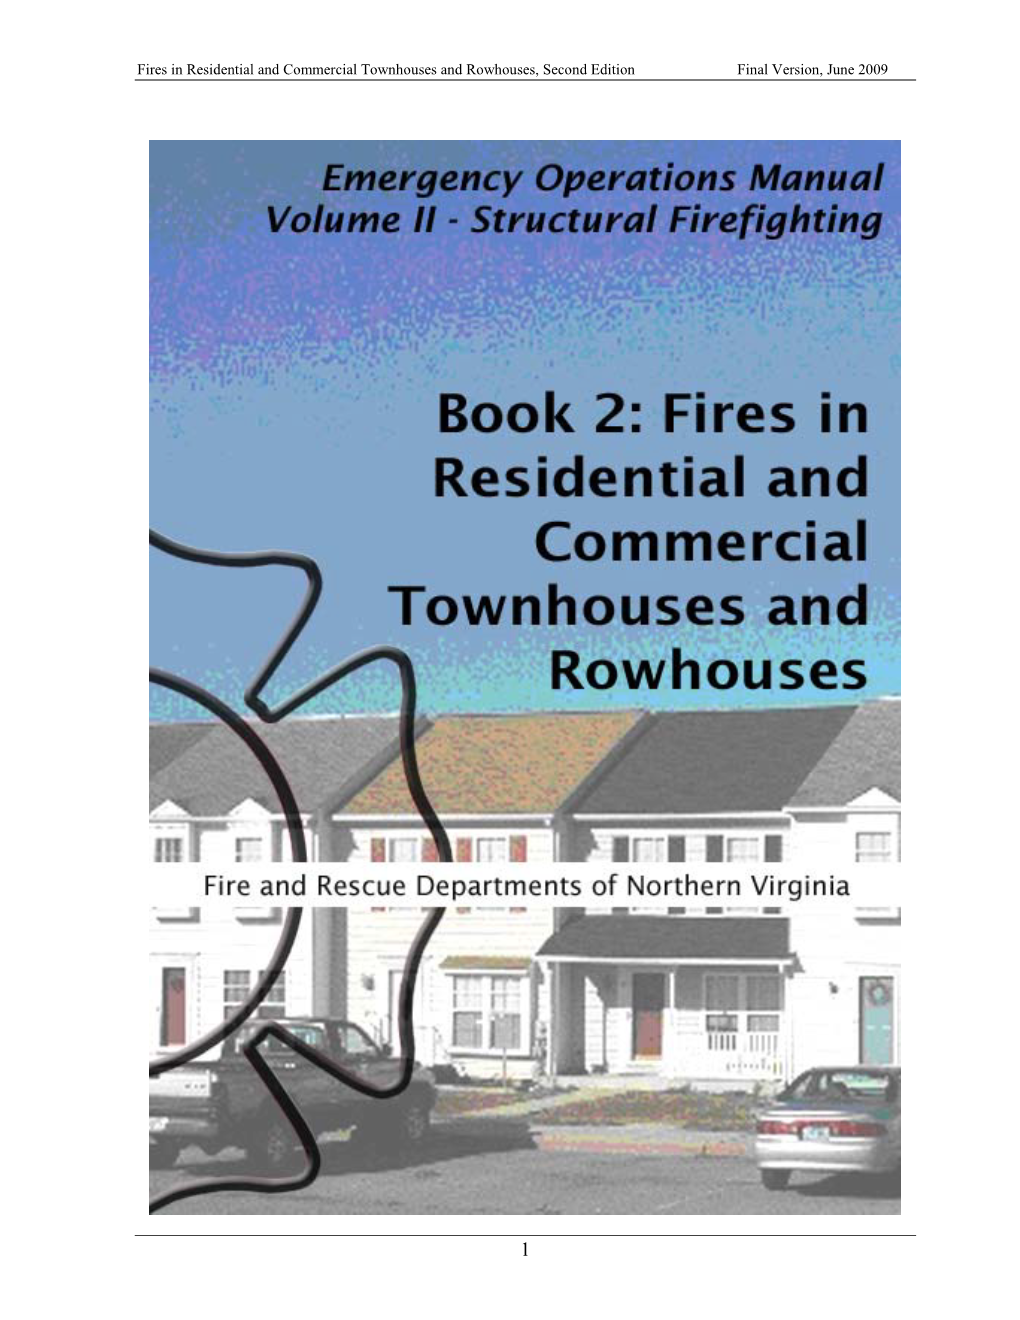 Fires in Residential and Commercial Townhouses and Rowhouses, Second Edition Final Version, June 2009